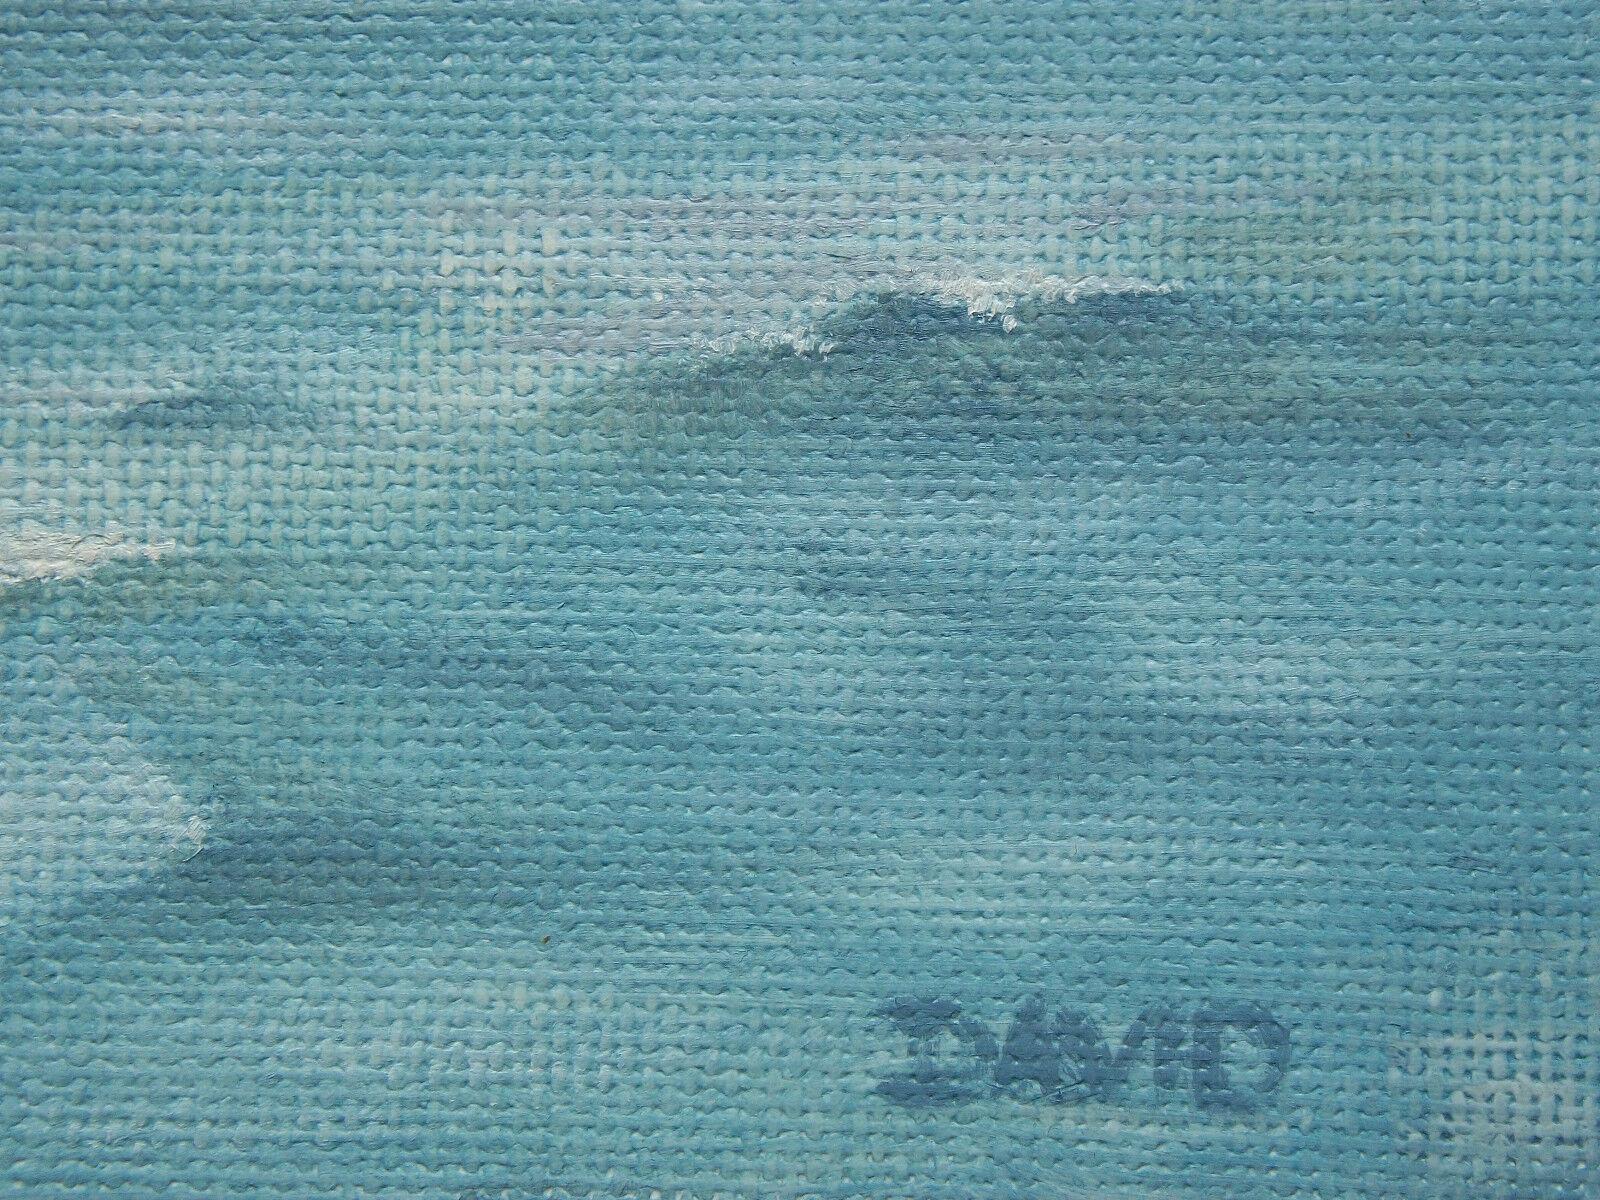 Hand-Painted DAVID LANGDON - 'Cliffs of Dover' - Contemporary Oil Painting - Signed - C. 2000 For Sale